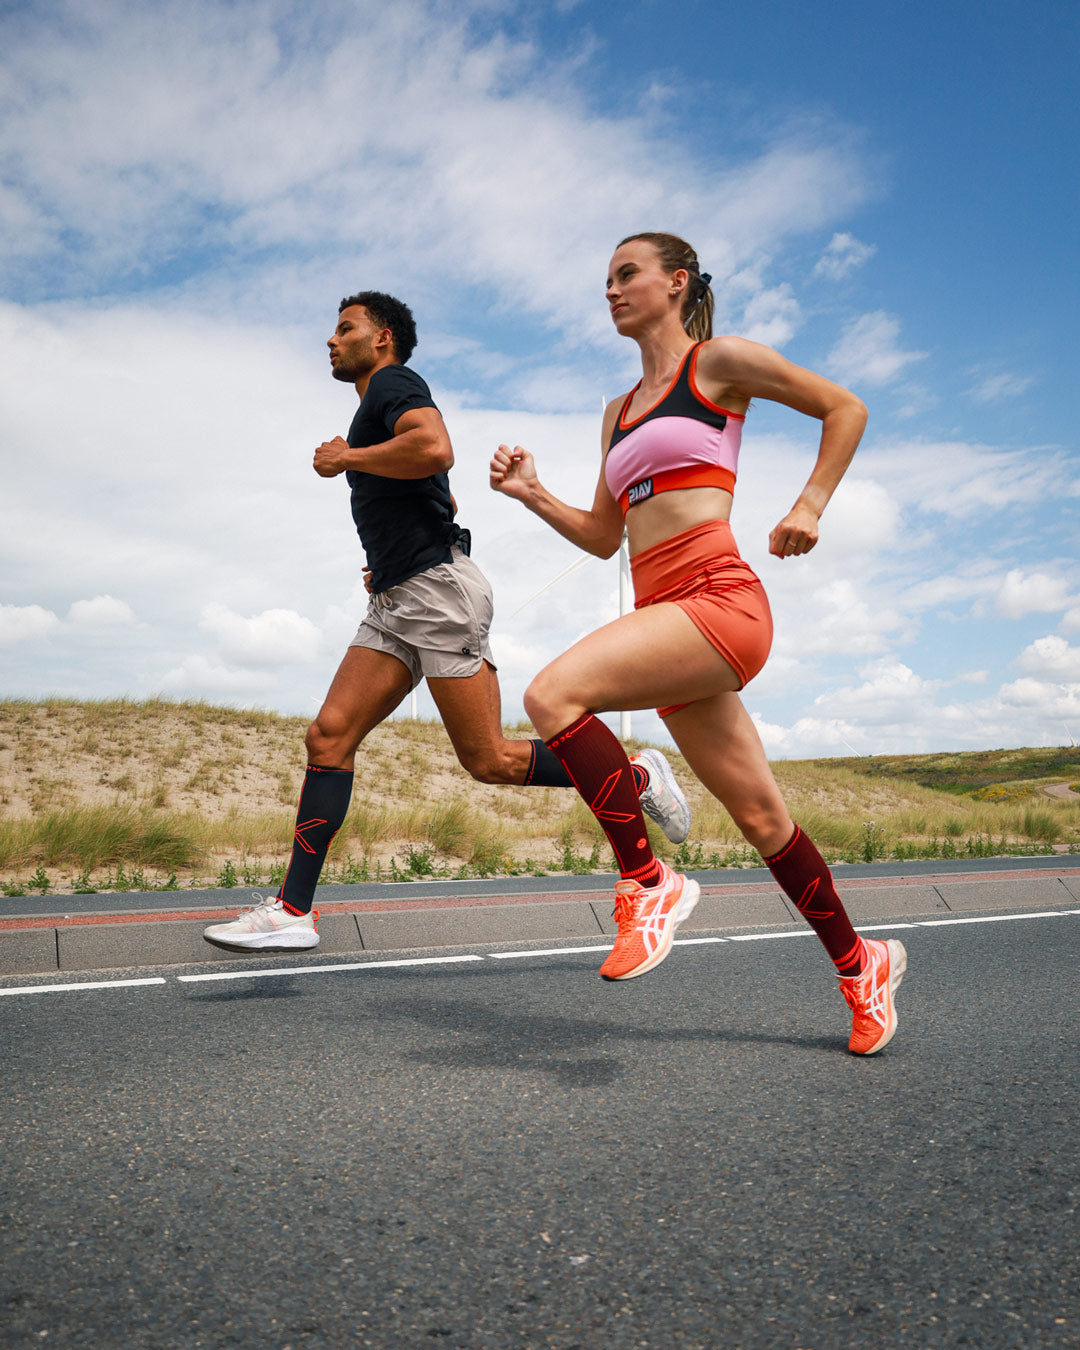 Man and woman running side by side in gray and red shorts